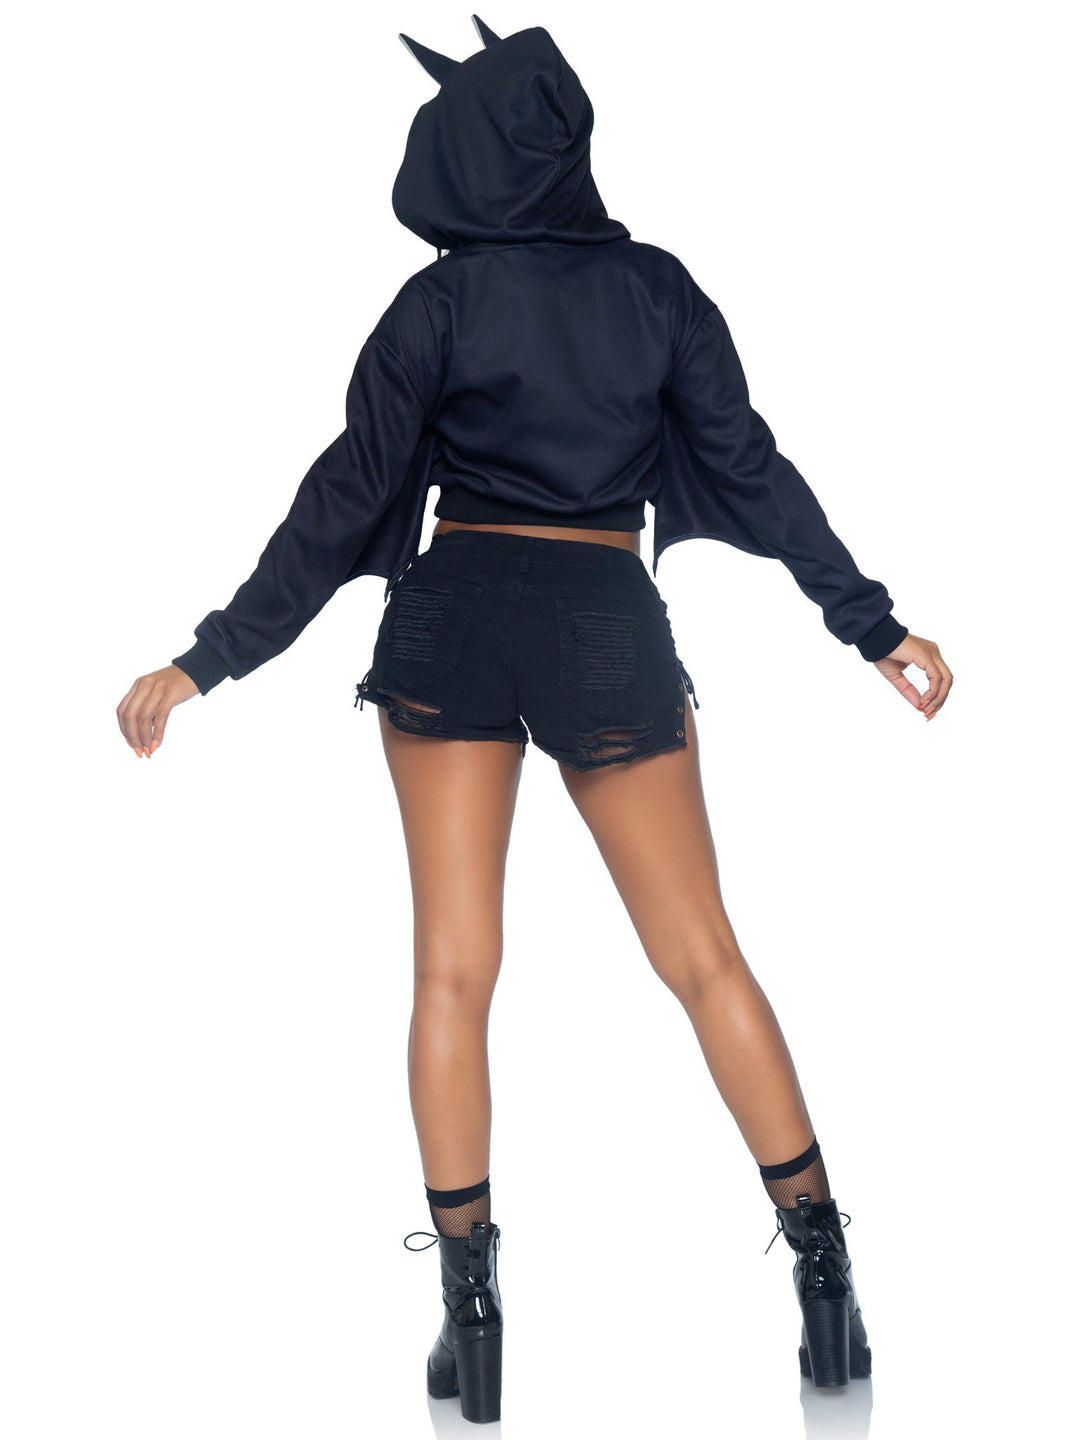 Bat Cropped Lace Up Hoodie with Bat Wing Sleeves